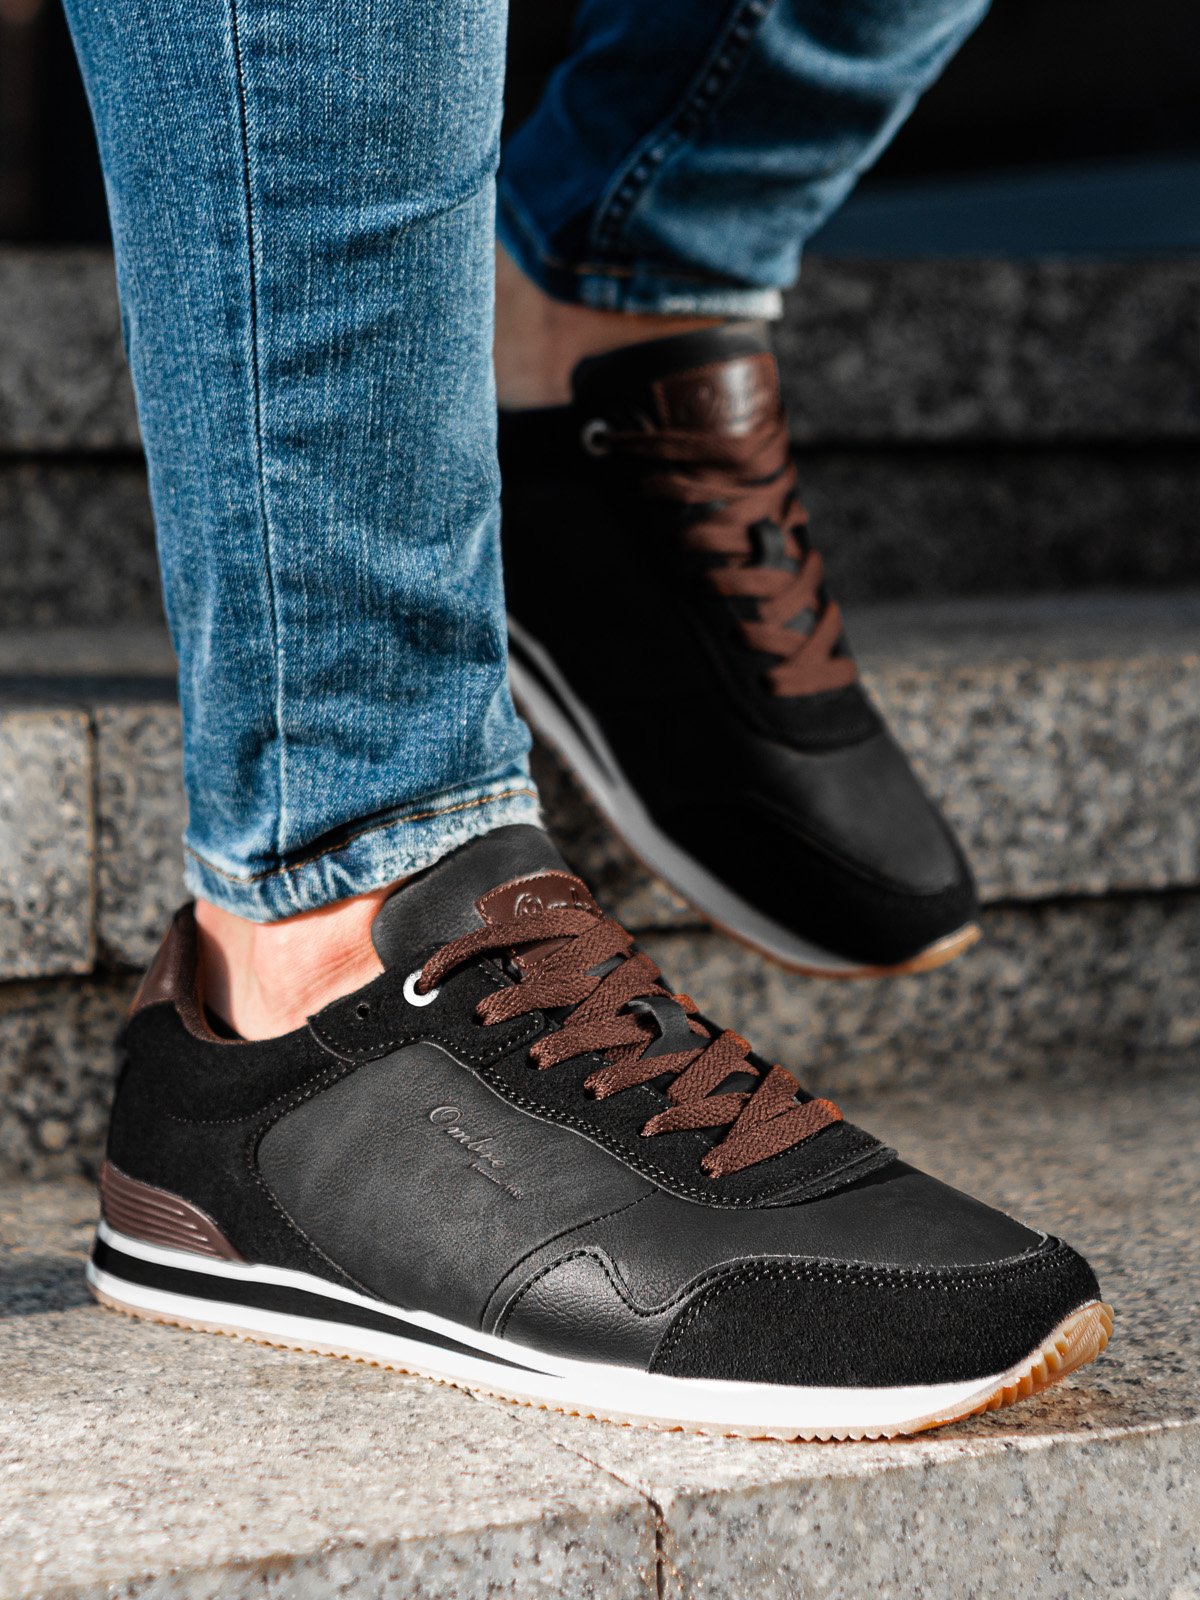 men's casual sneakers with jeans